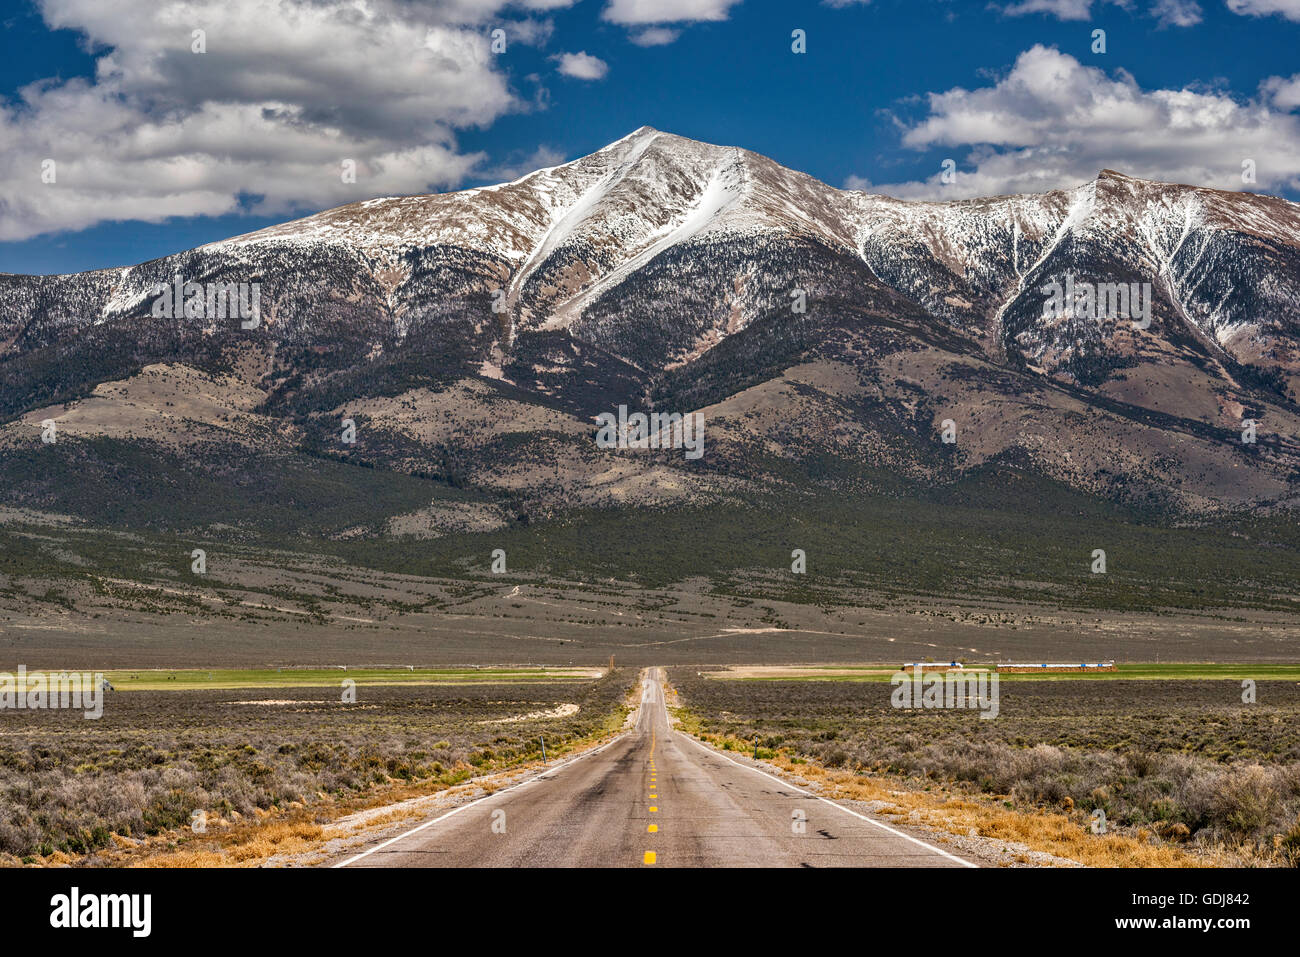 Wheeler Peak in Great Basin National Park, Snake Range mountains, view from State Highway 894 in Spring Valley, Nevada, USA Stock Photo